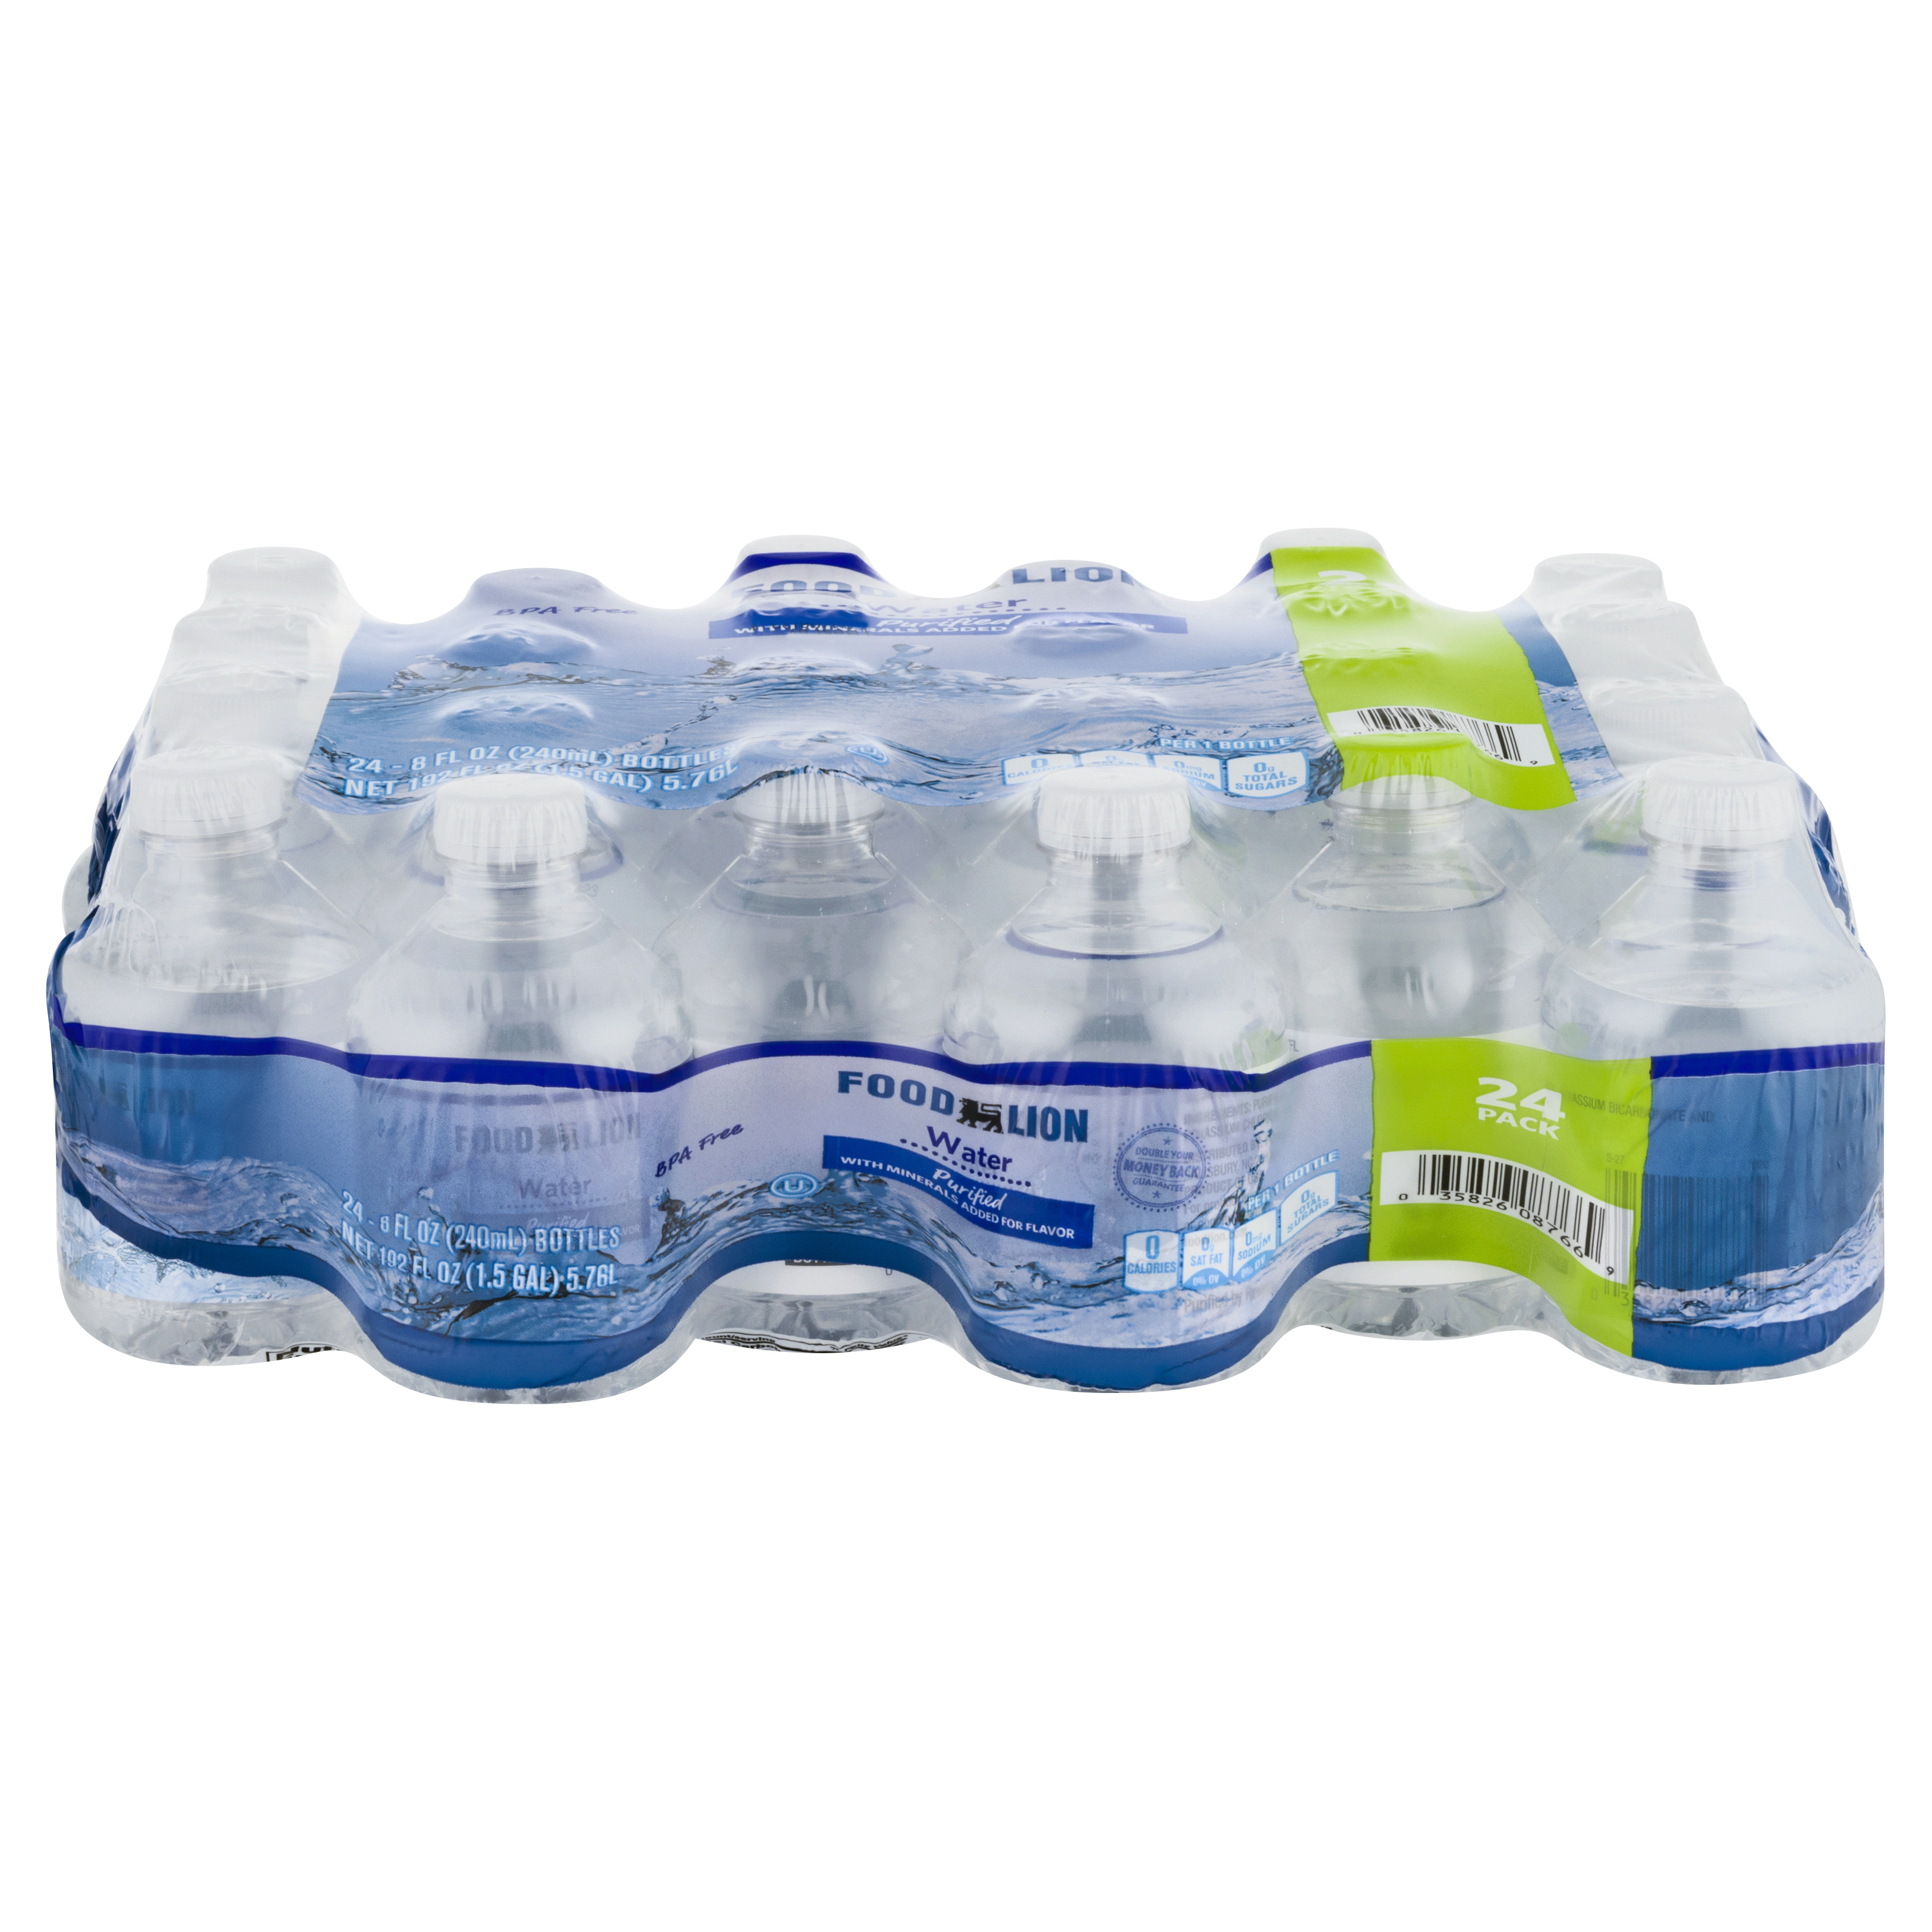 Purified Water - 8 oz Bottle, 24 pack